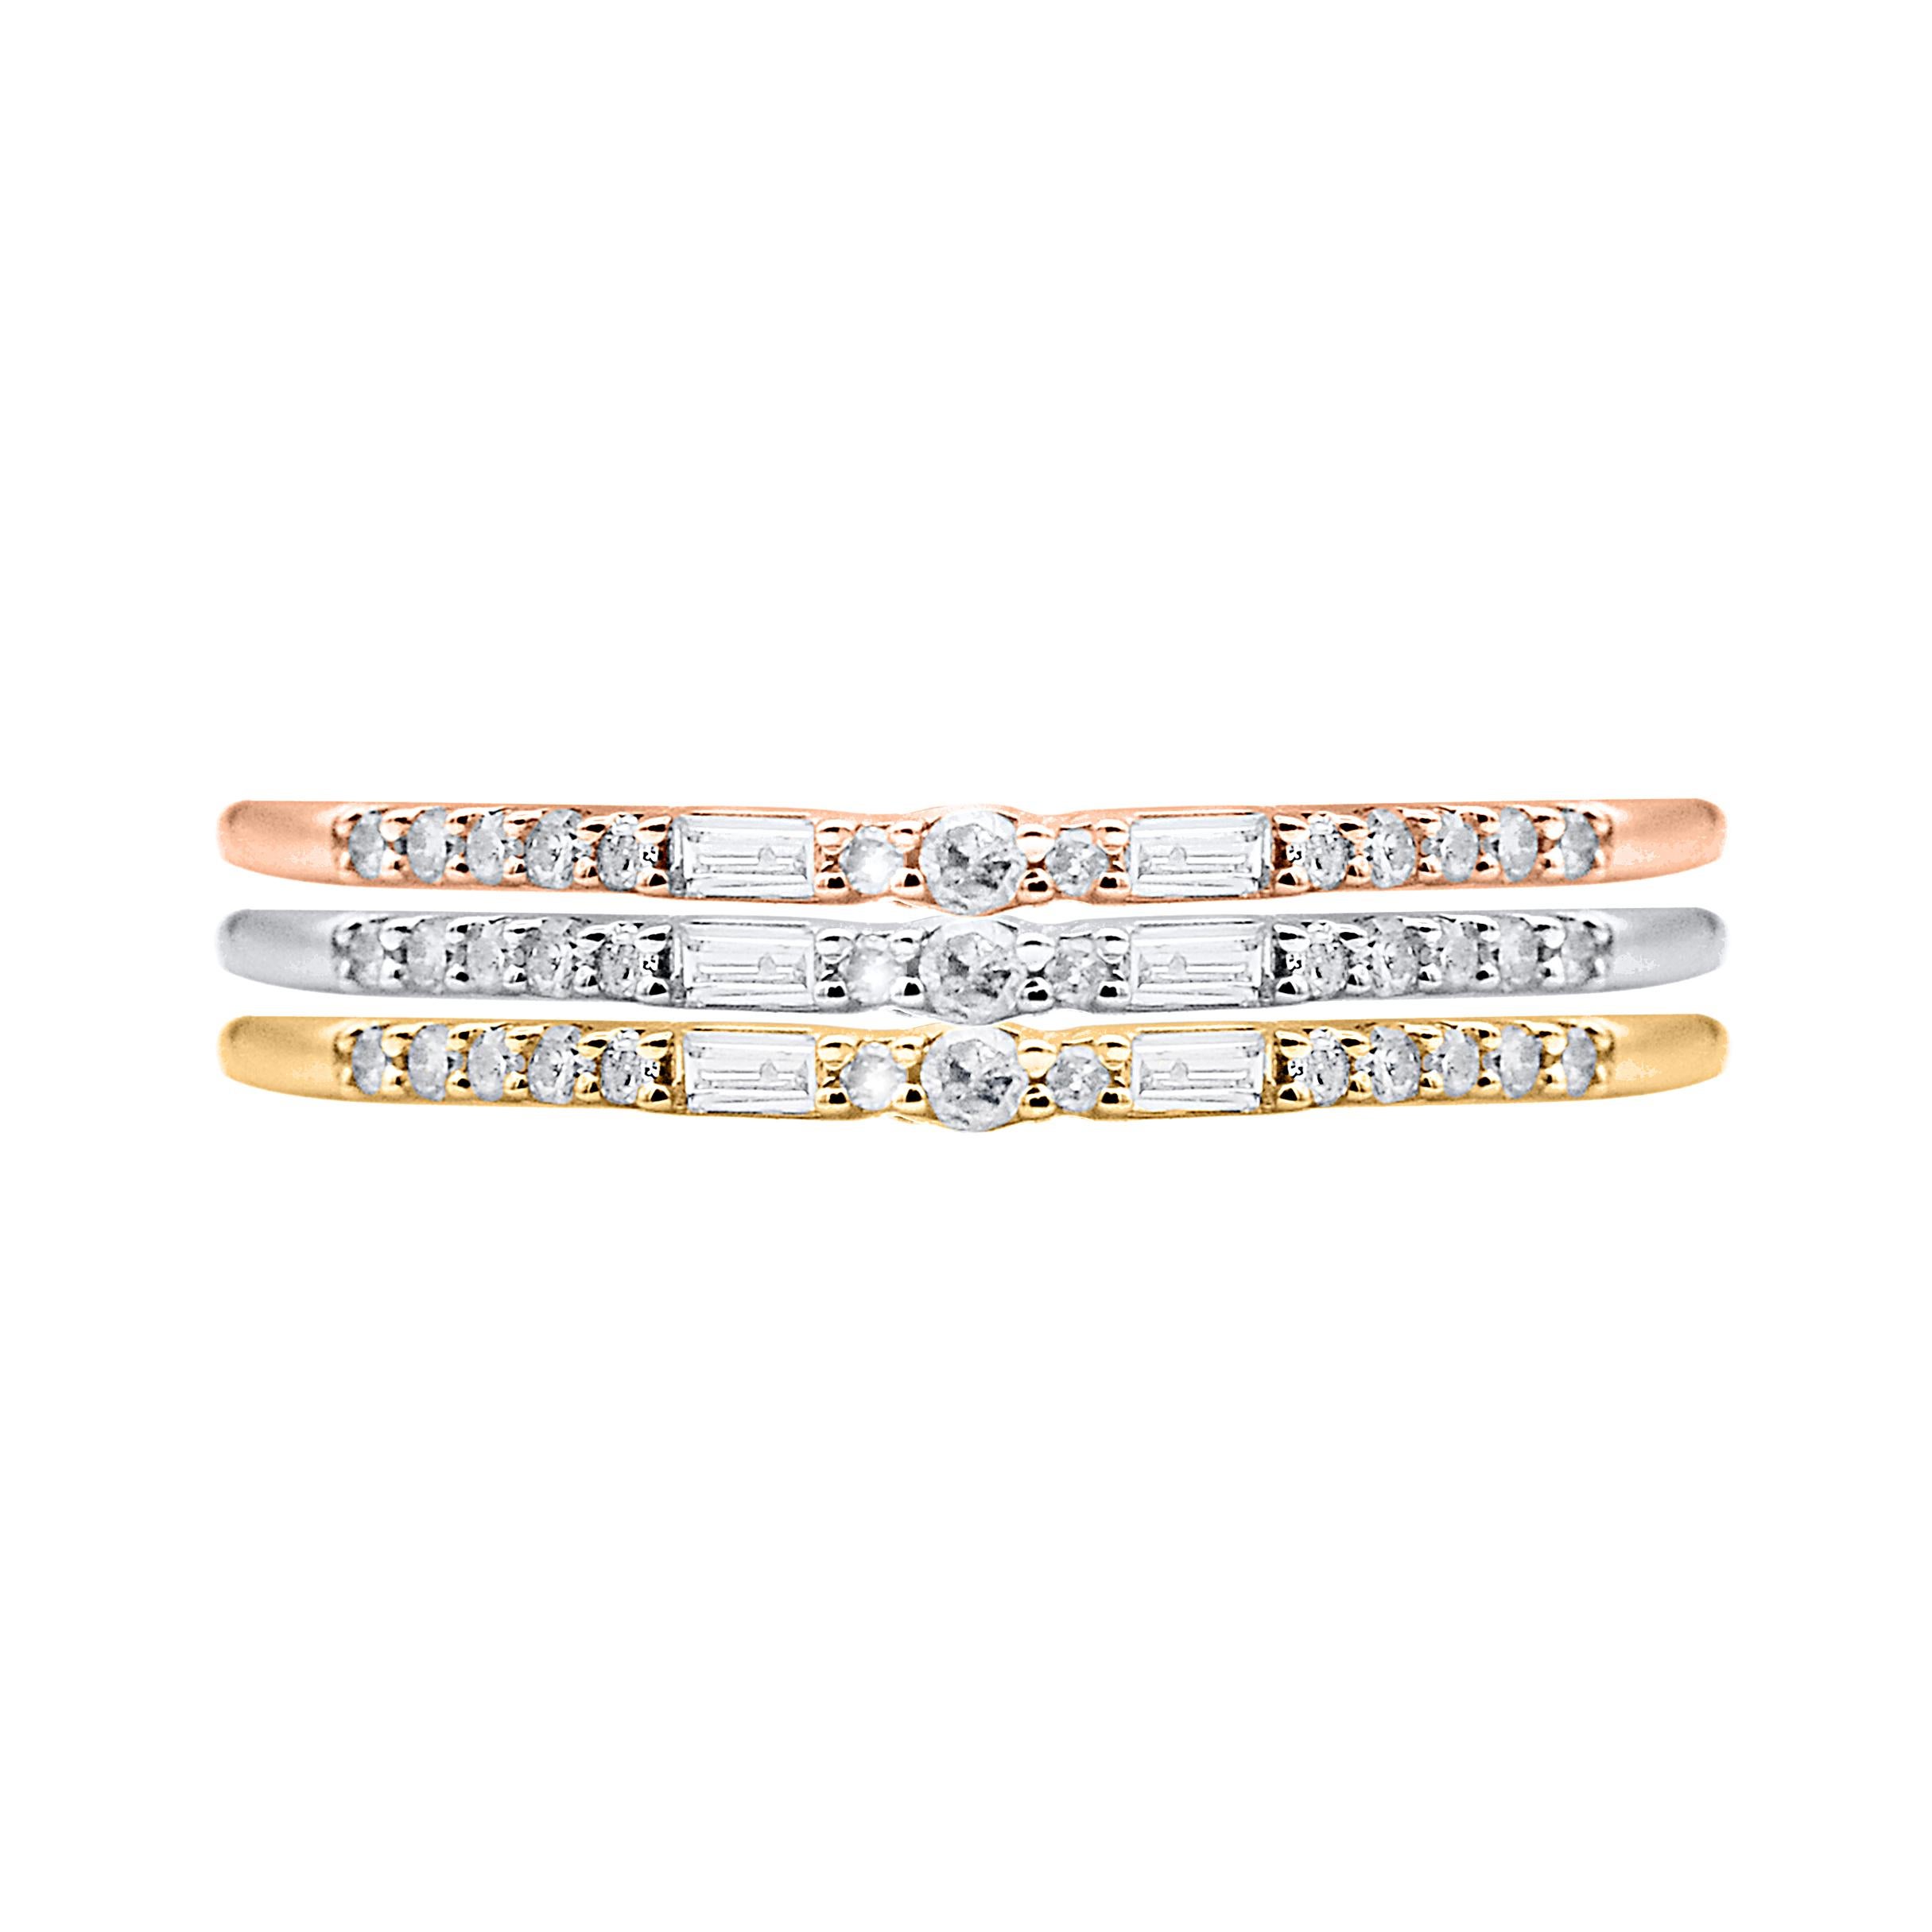 This three-piece diamond band set is a look she'll turn to often. This set includes one piece each rose, yellow and white gold. This ring is beautifully crafted in 14 Karat white, rose and yellow gold and embedded with 45 baguette cut, single cut &